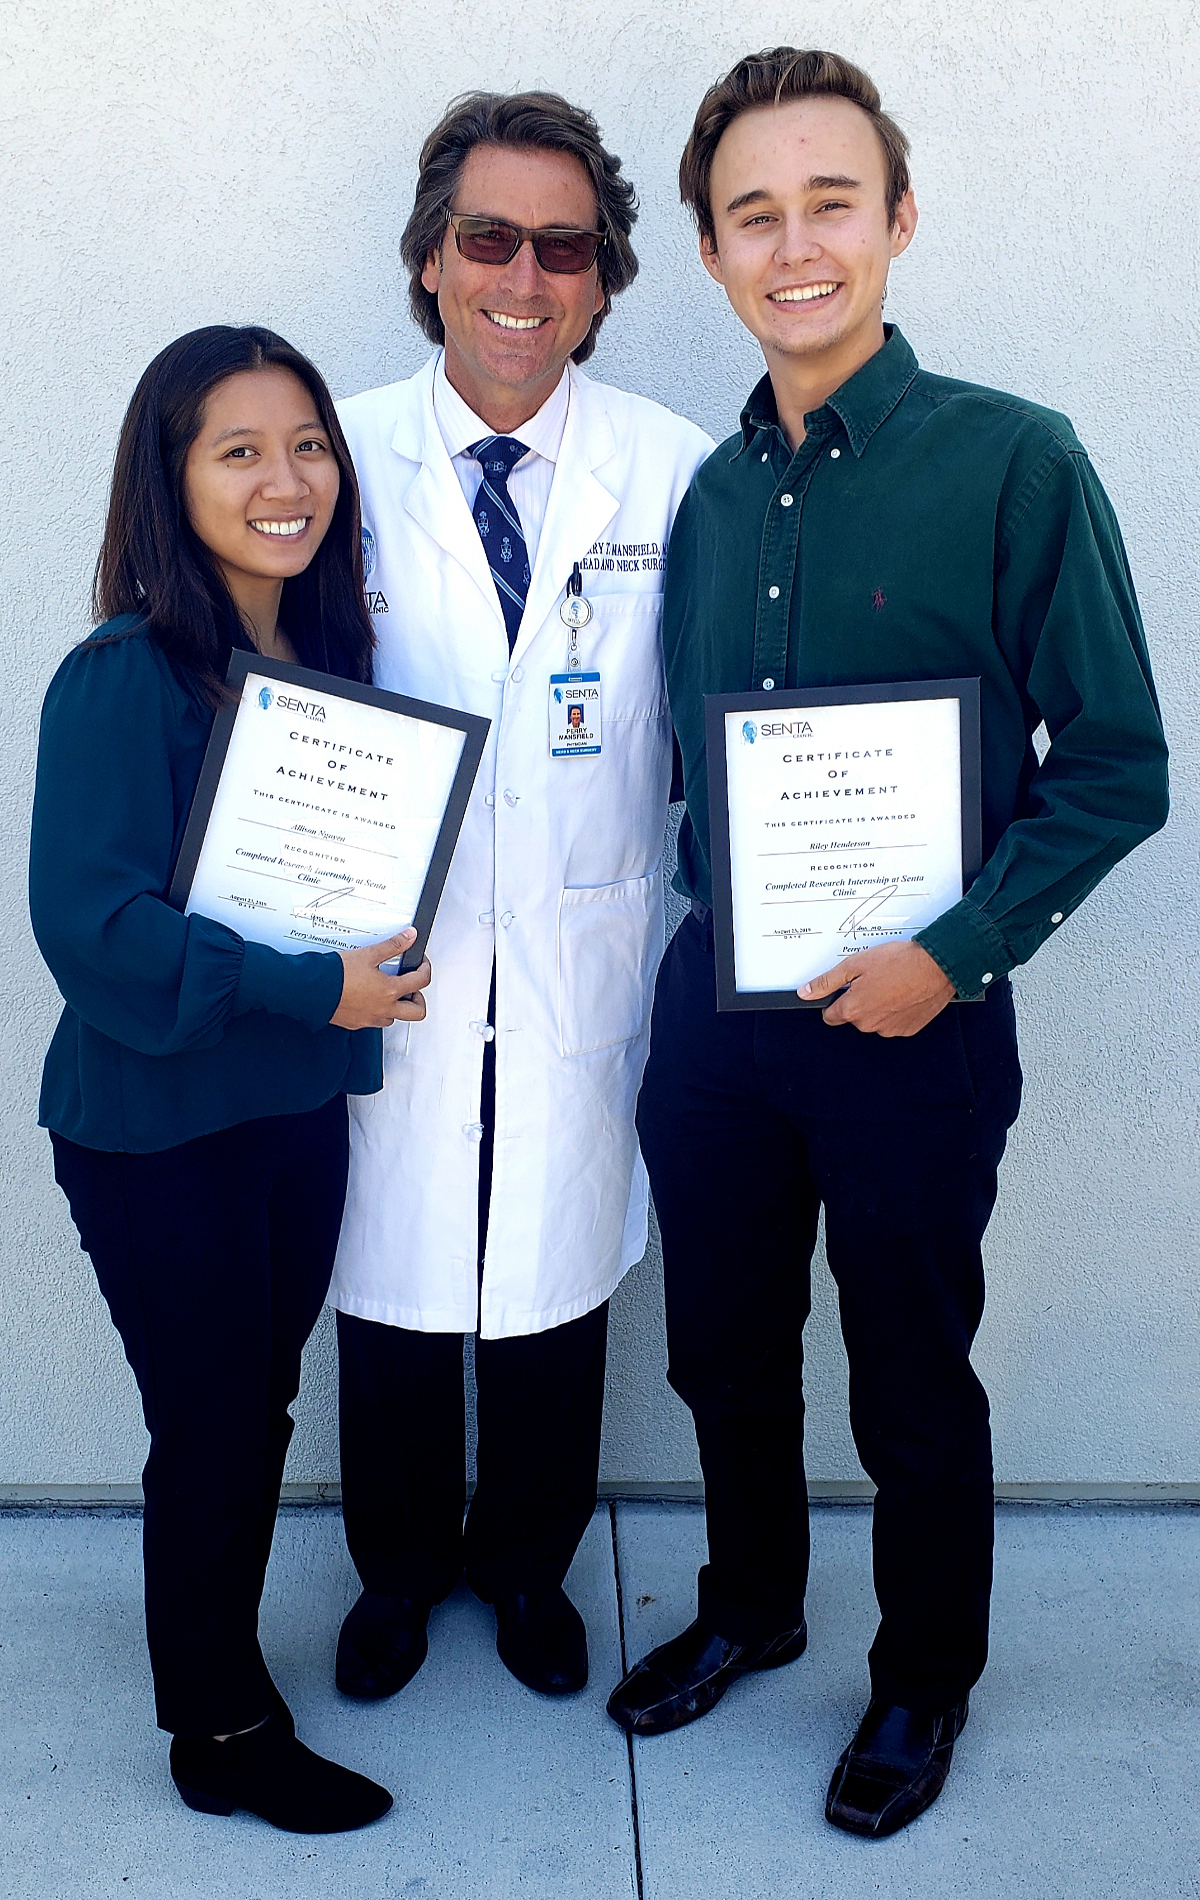 Dr. Perry with Alllison Nguyen and Riley Henderson, with their certificates of achievement.